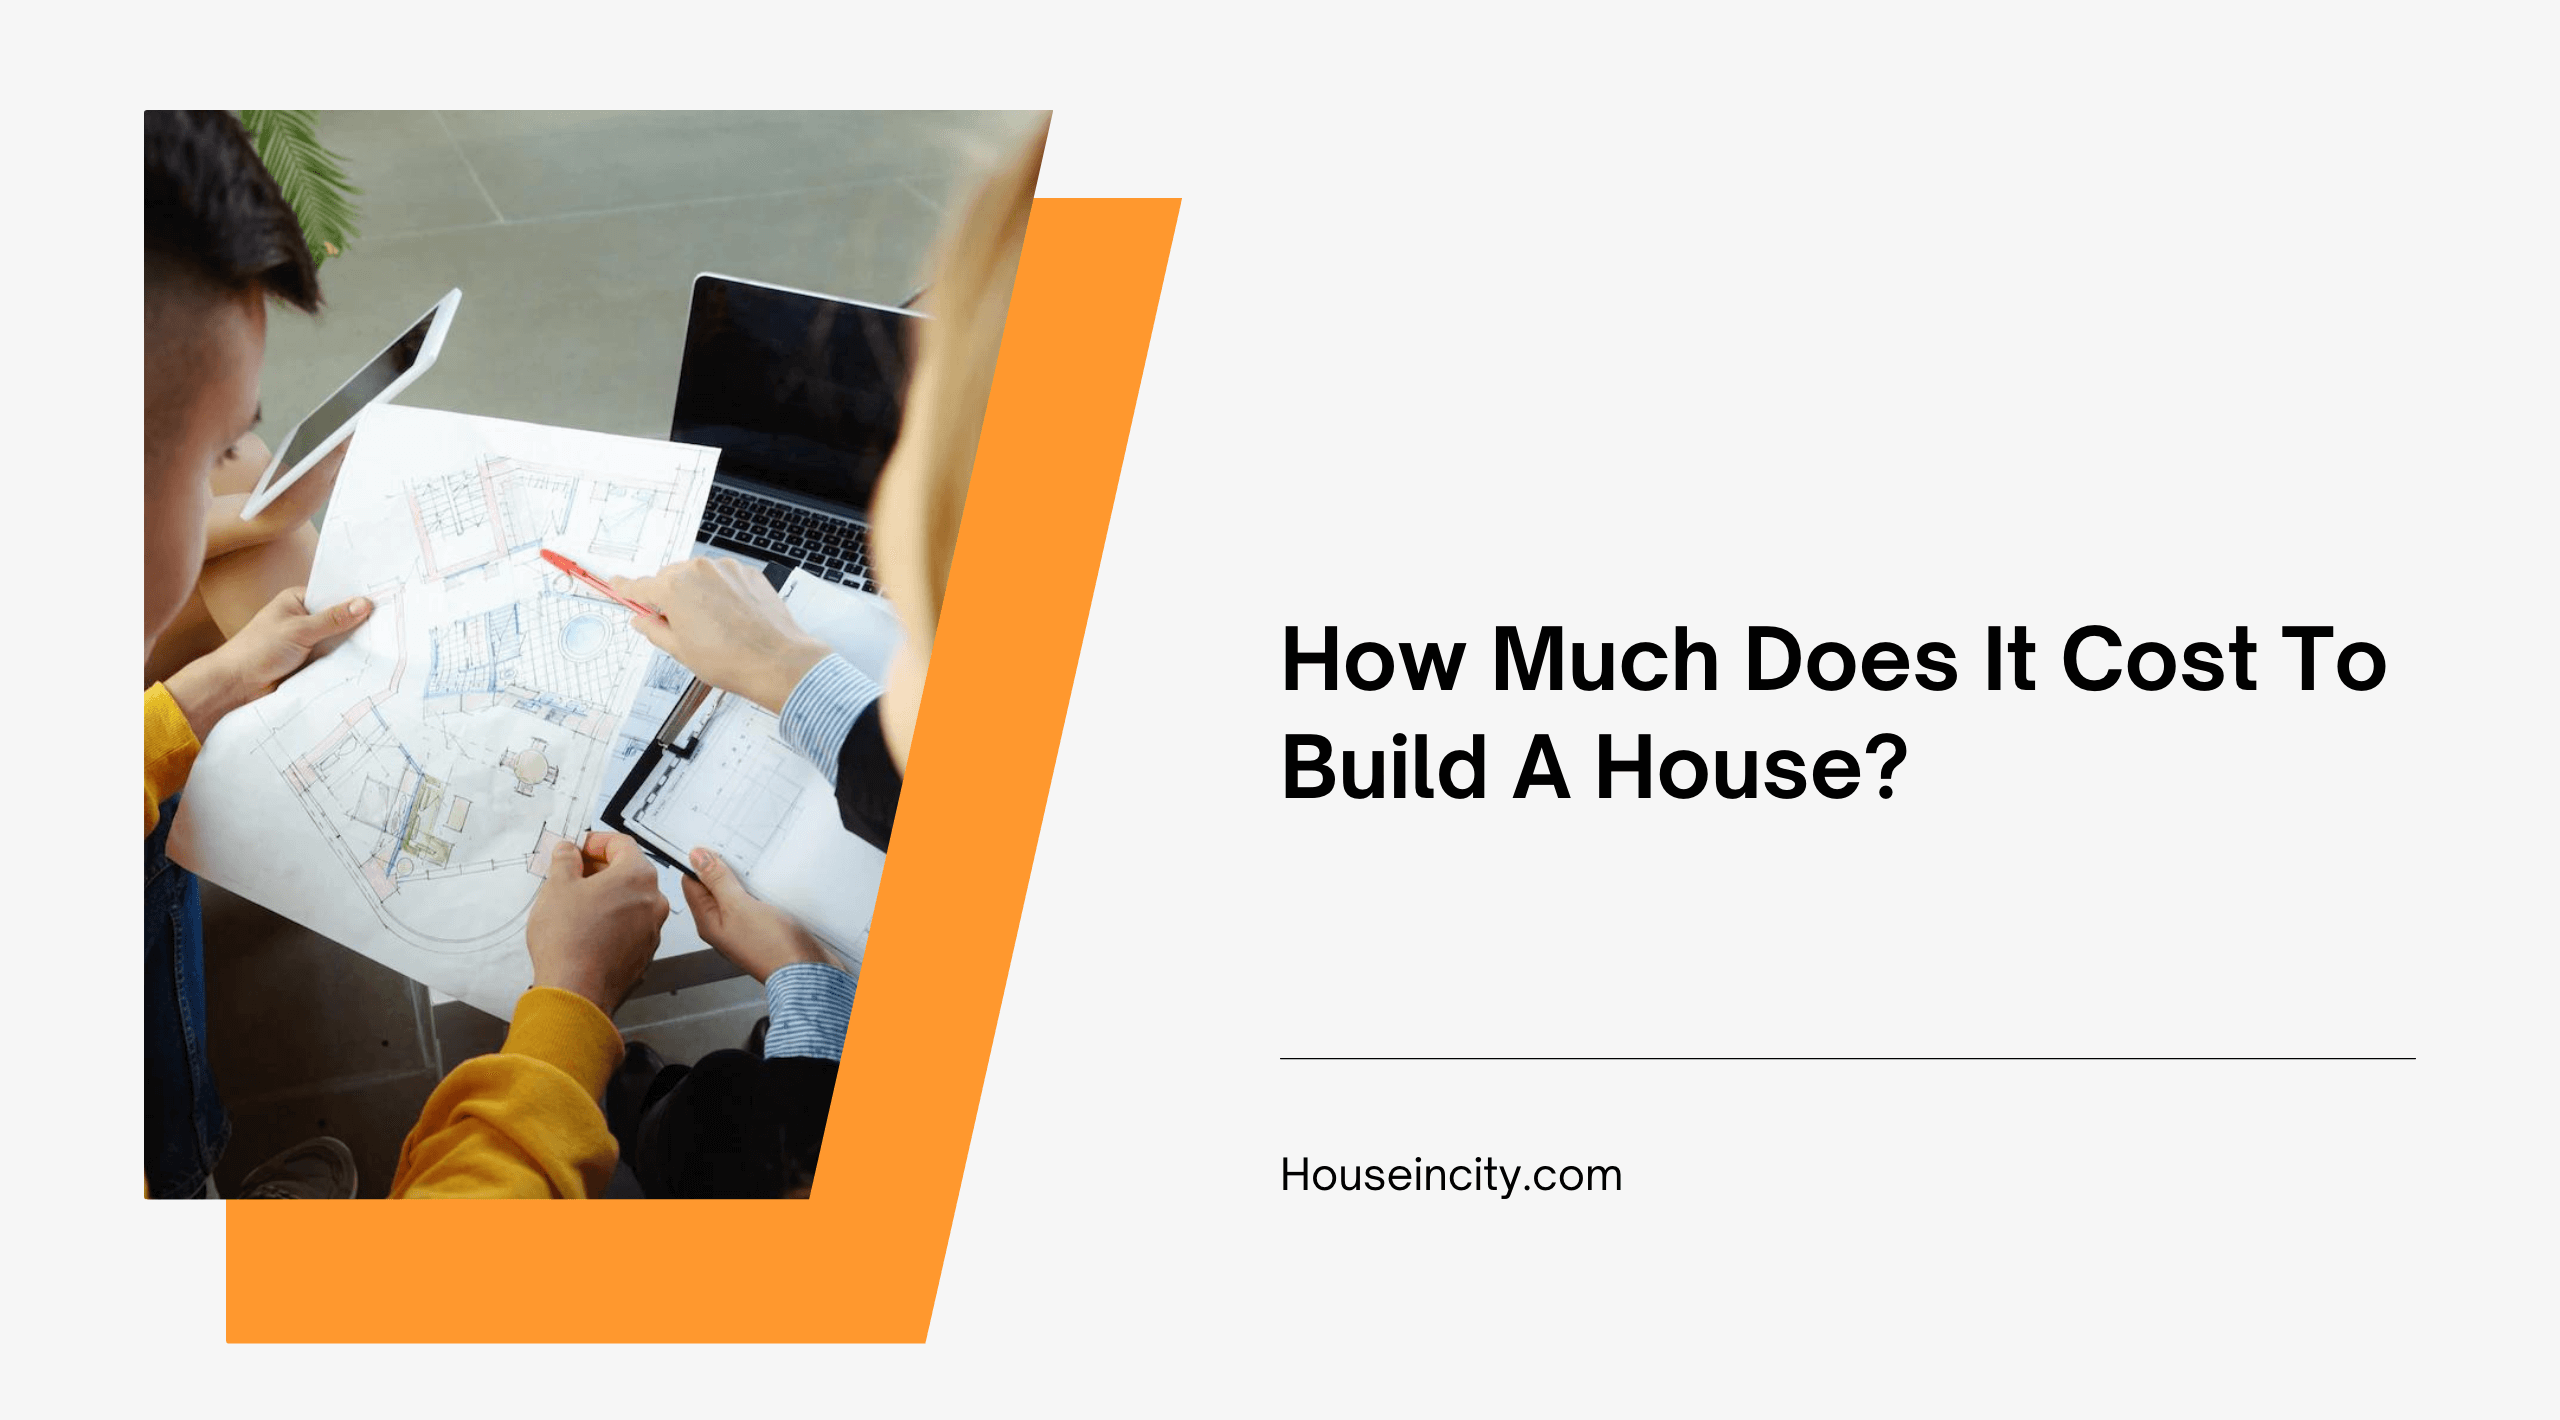 How Much Does It Cost To Build A House?